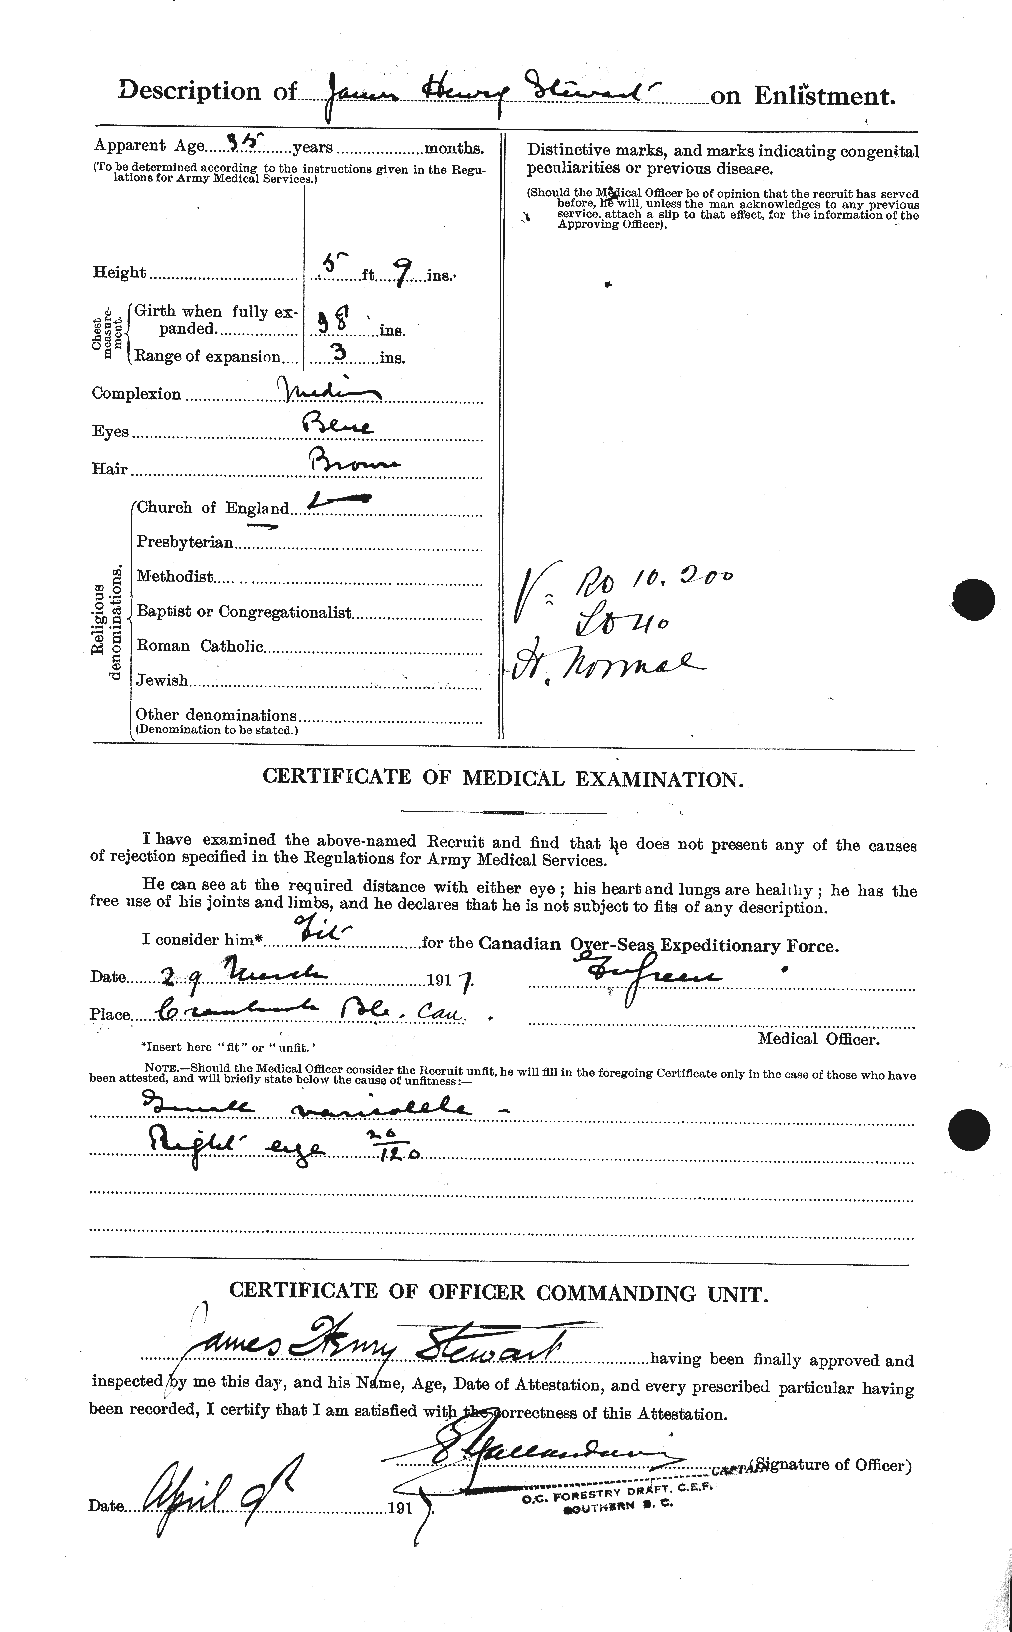 Personnel Records of the First World War - CEF 623493b